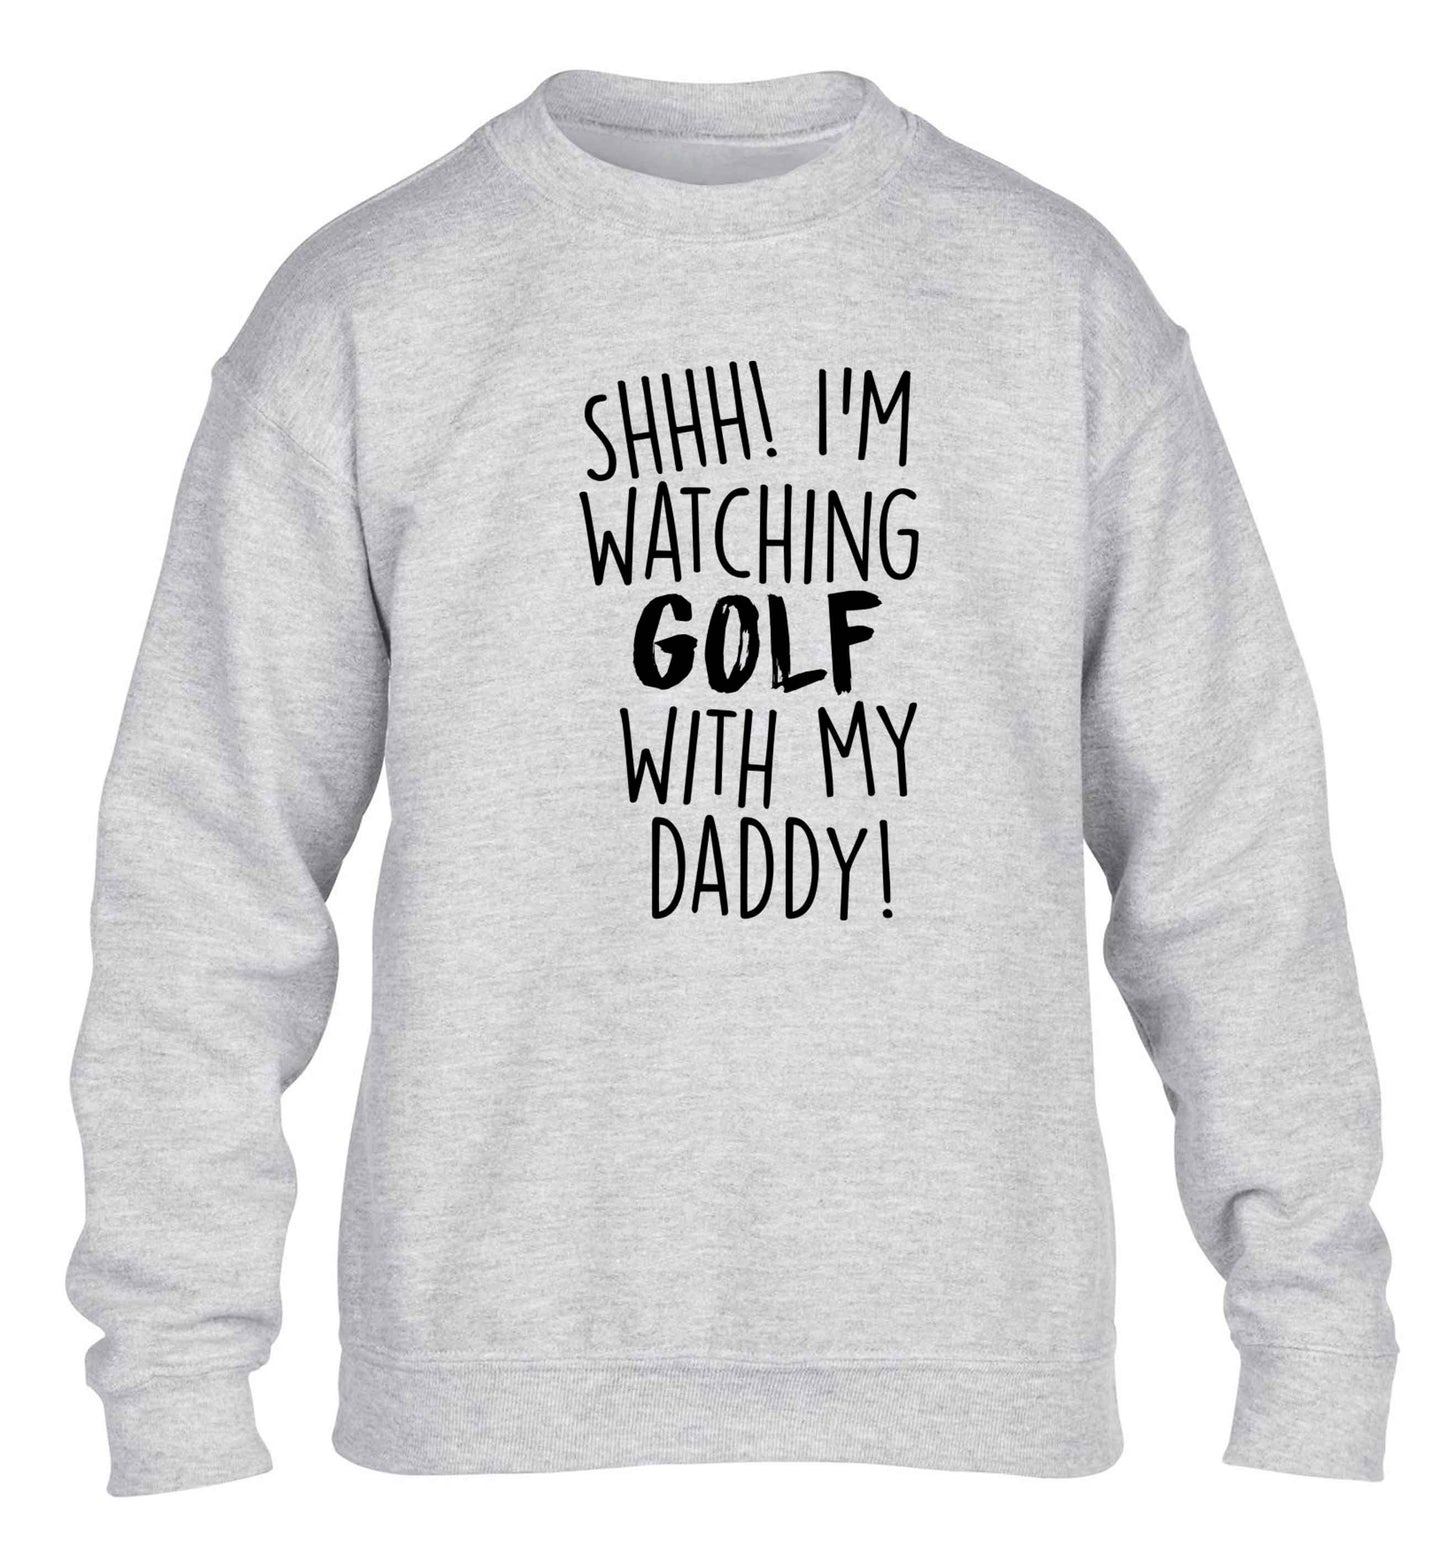 Shh I'm watching golf with my daddy children's grey sweater 12-13 Years